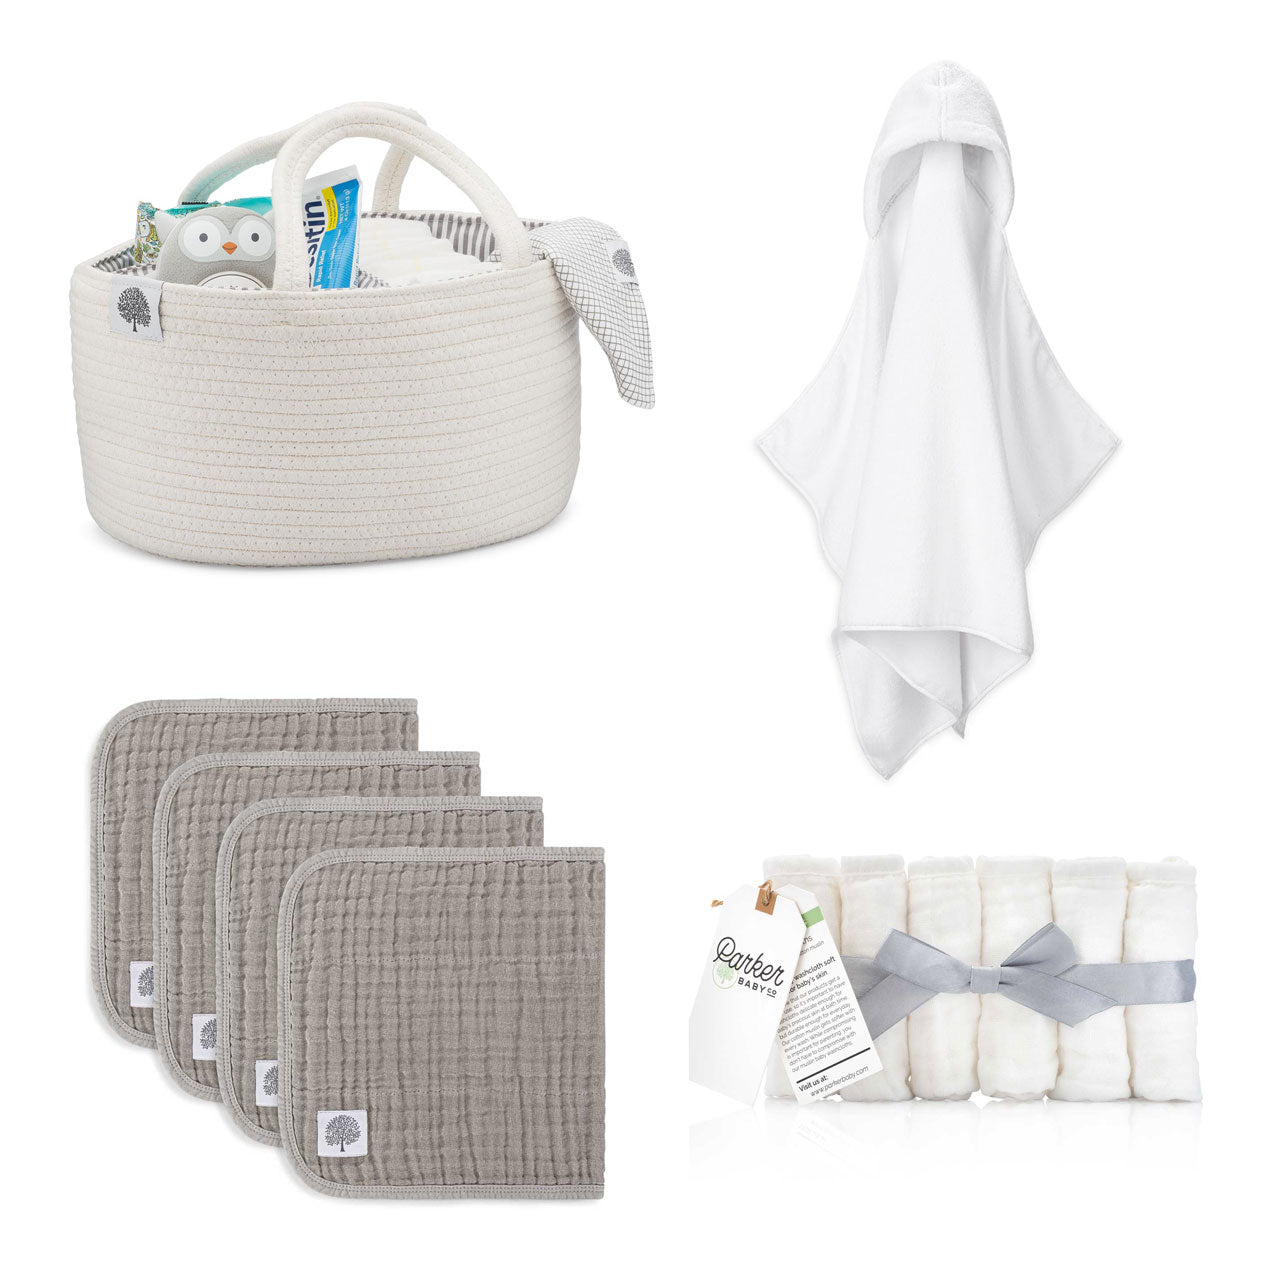 Baby Care Set for baby includes White Rope Diaper Caddy, Hooded Bath Towel, Gray Muslin Burp Cloths and Muslin Washcloths